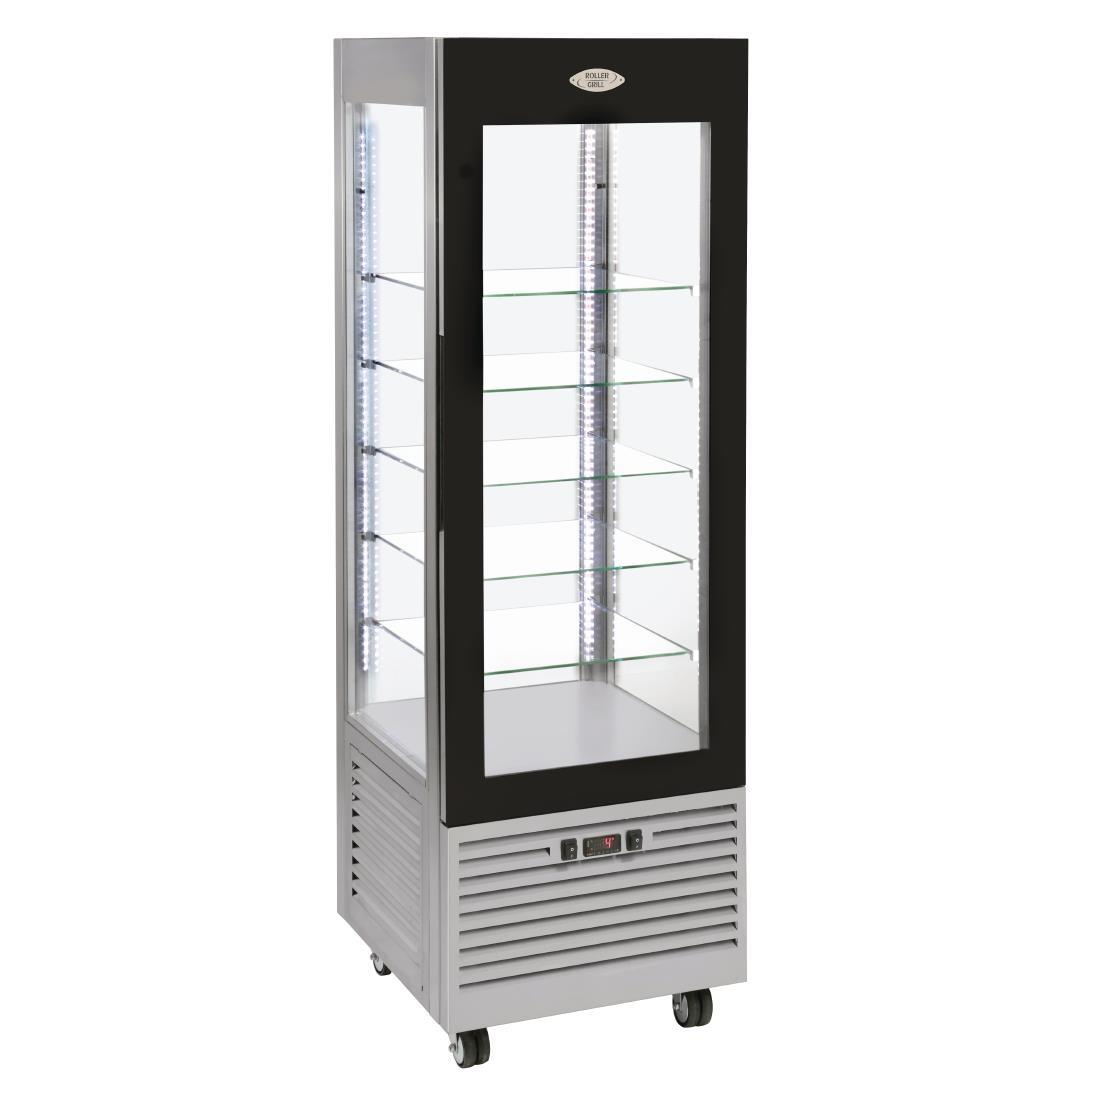 Roller Grill Display Fridge with Fixed Shelves Stainless Steel - DT733  - 1